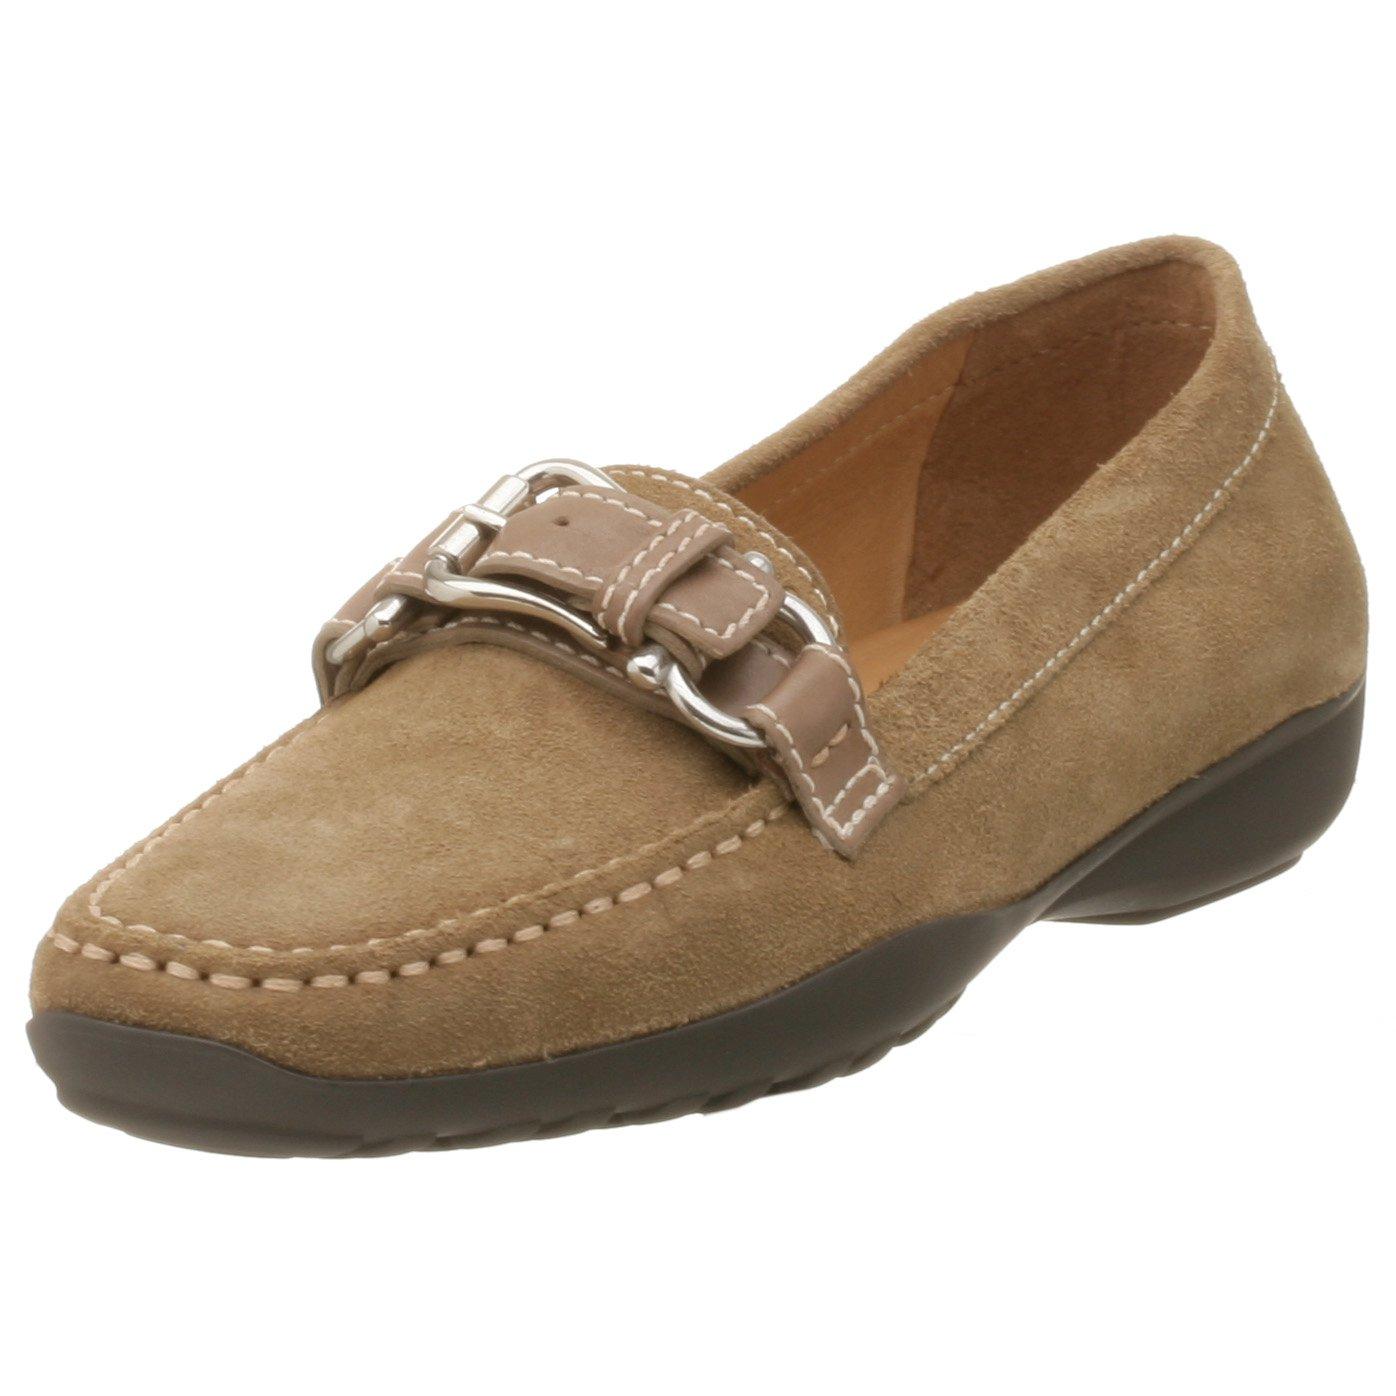 Geox Wintergrin 1 Moccasin With Buckle,sand,38.5 Eu in Brown | Lyst